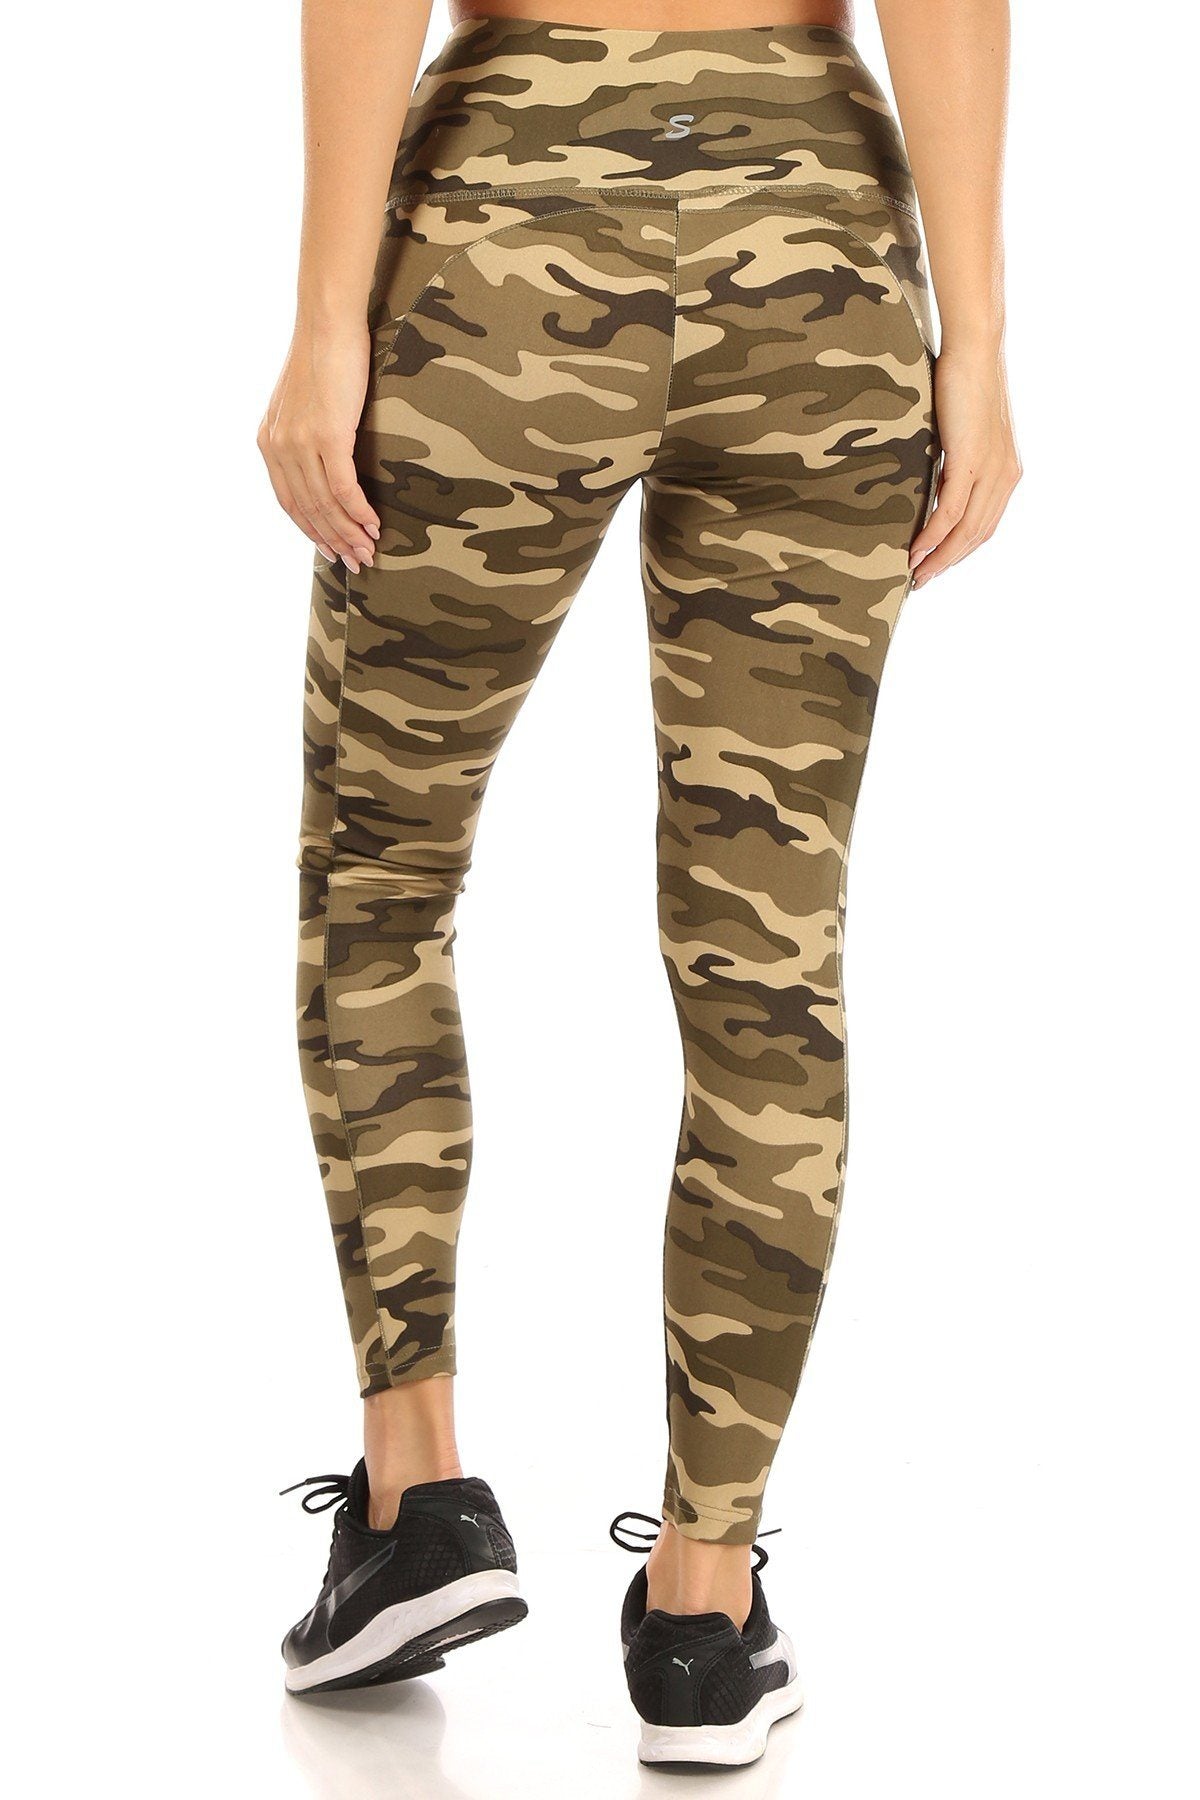 Womens Plus Size Camouflage Pocket Leggings: 1xl-2xl-3xl Leggings MomMe and More 